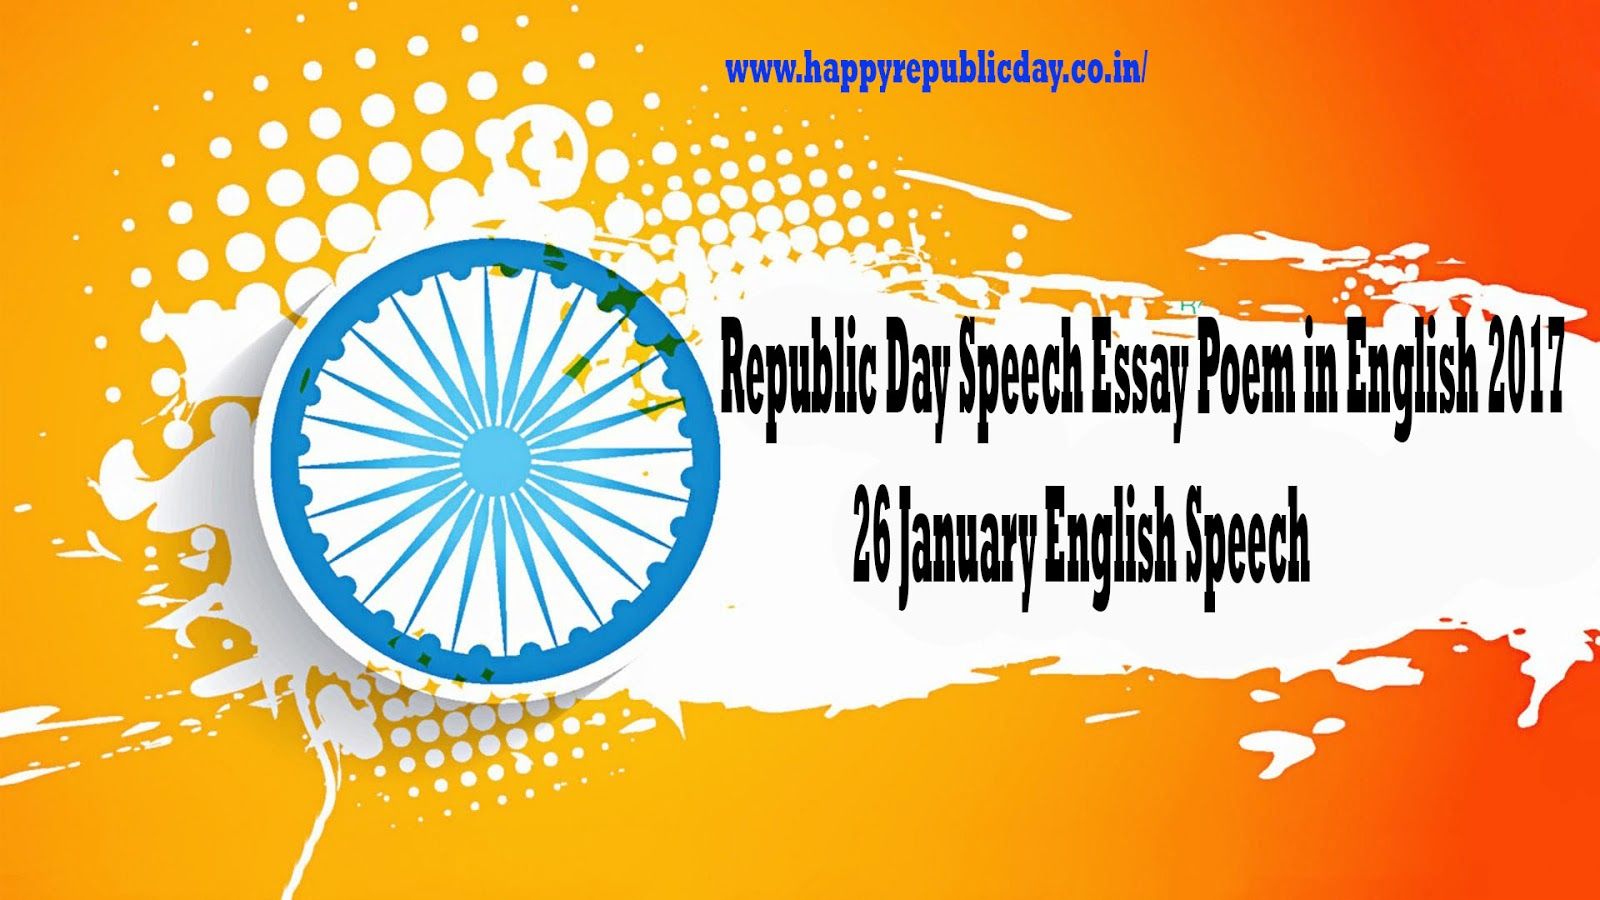 Republic Day Poem in English 2021– 26 January English Speech & Essay Happy Republic Day 2021 Image, Quotes, Speech, Poems, Slogans